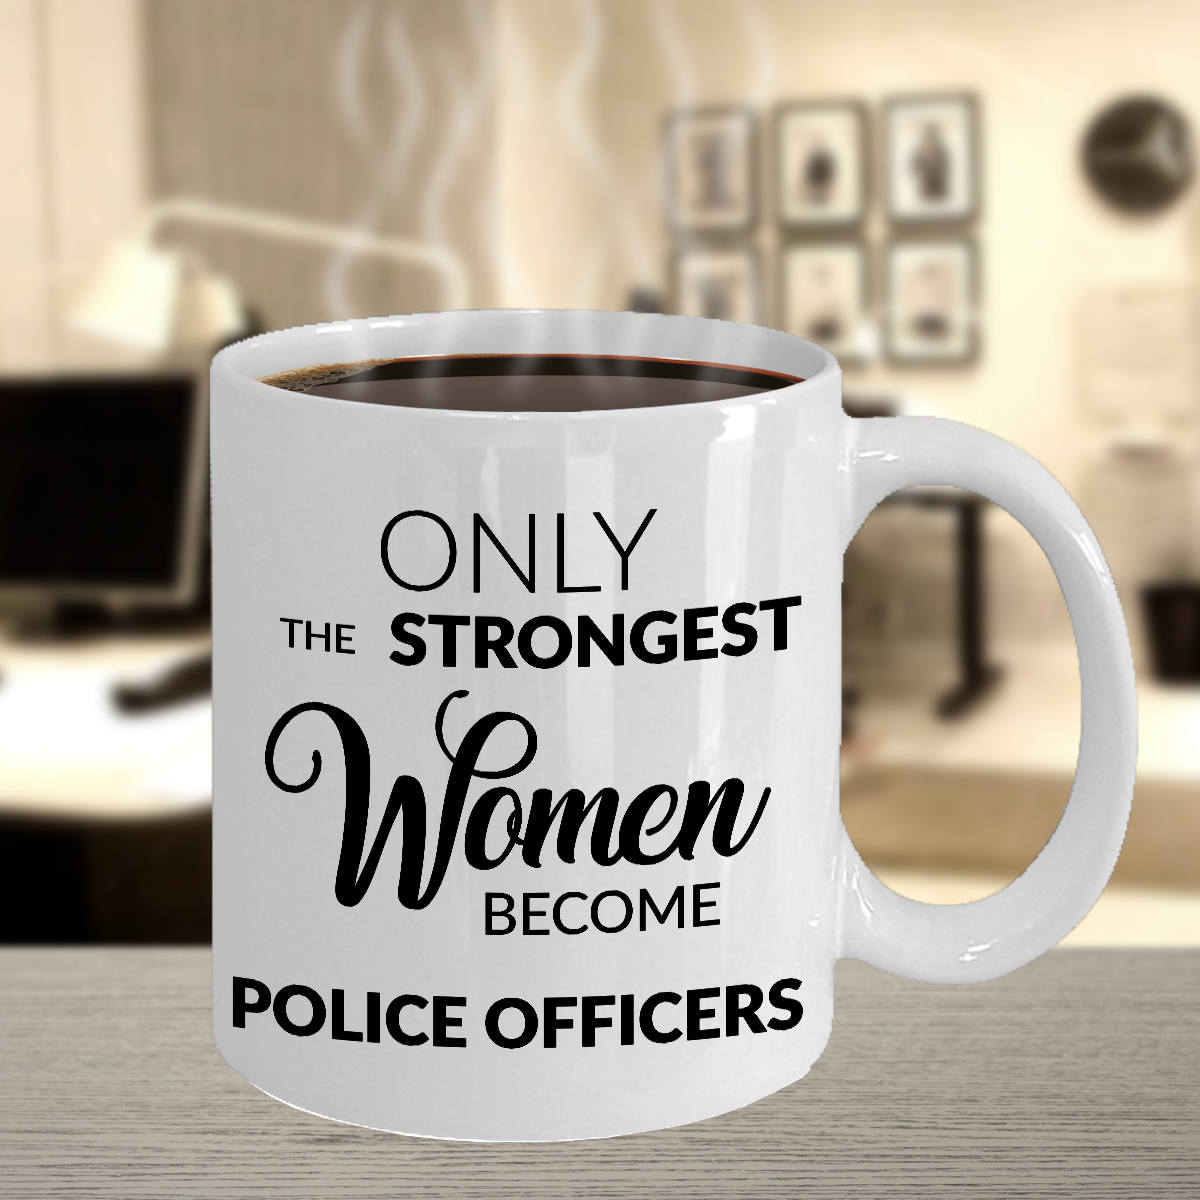 Female Police officer mug - Women Cops colleague gifts - policewoman cop PD  gift